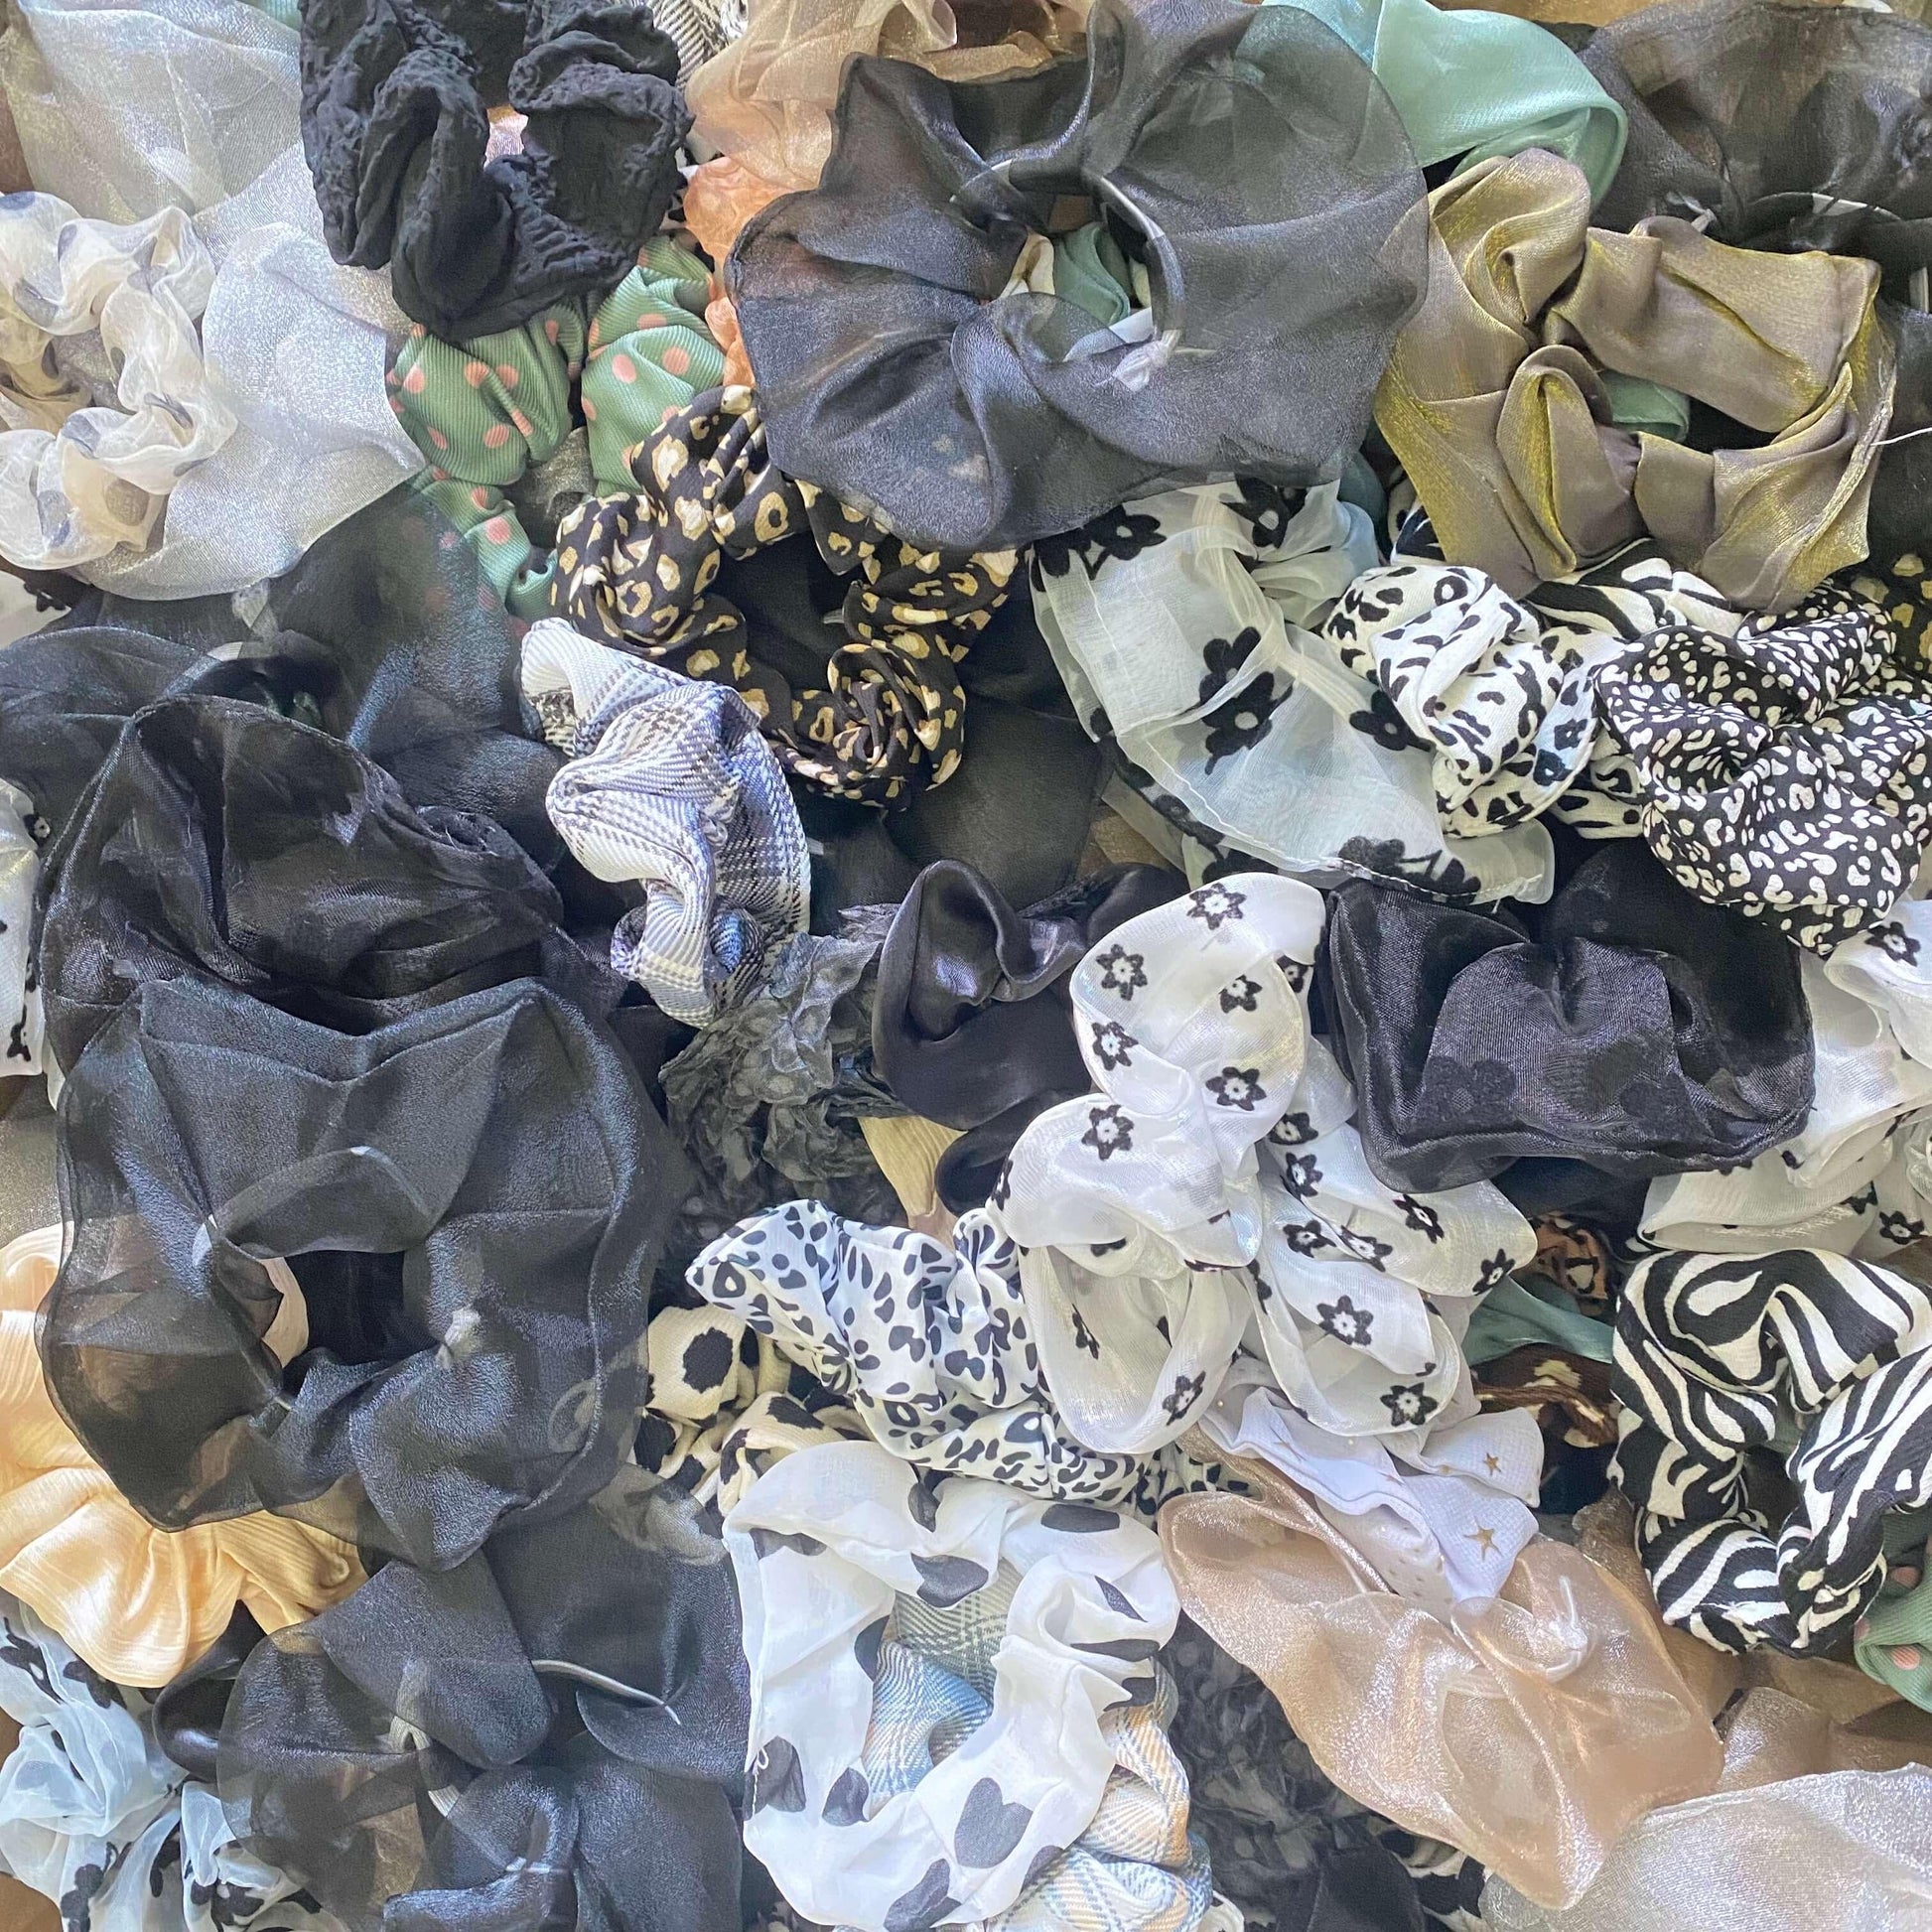 [ANNIVERSARY SCOOP] 1 Big Scoop of Dark/Neutral Scrunchies (#Lot 4 MORE NEW STYLES + Go Maximum for ALL SCOOPS!!) - Belle Rose Nails